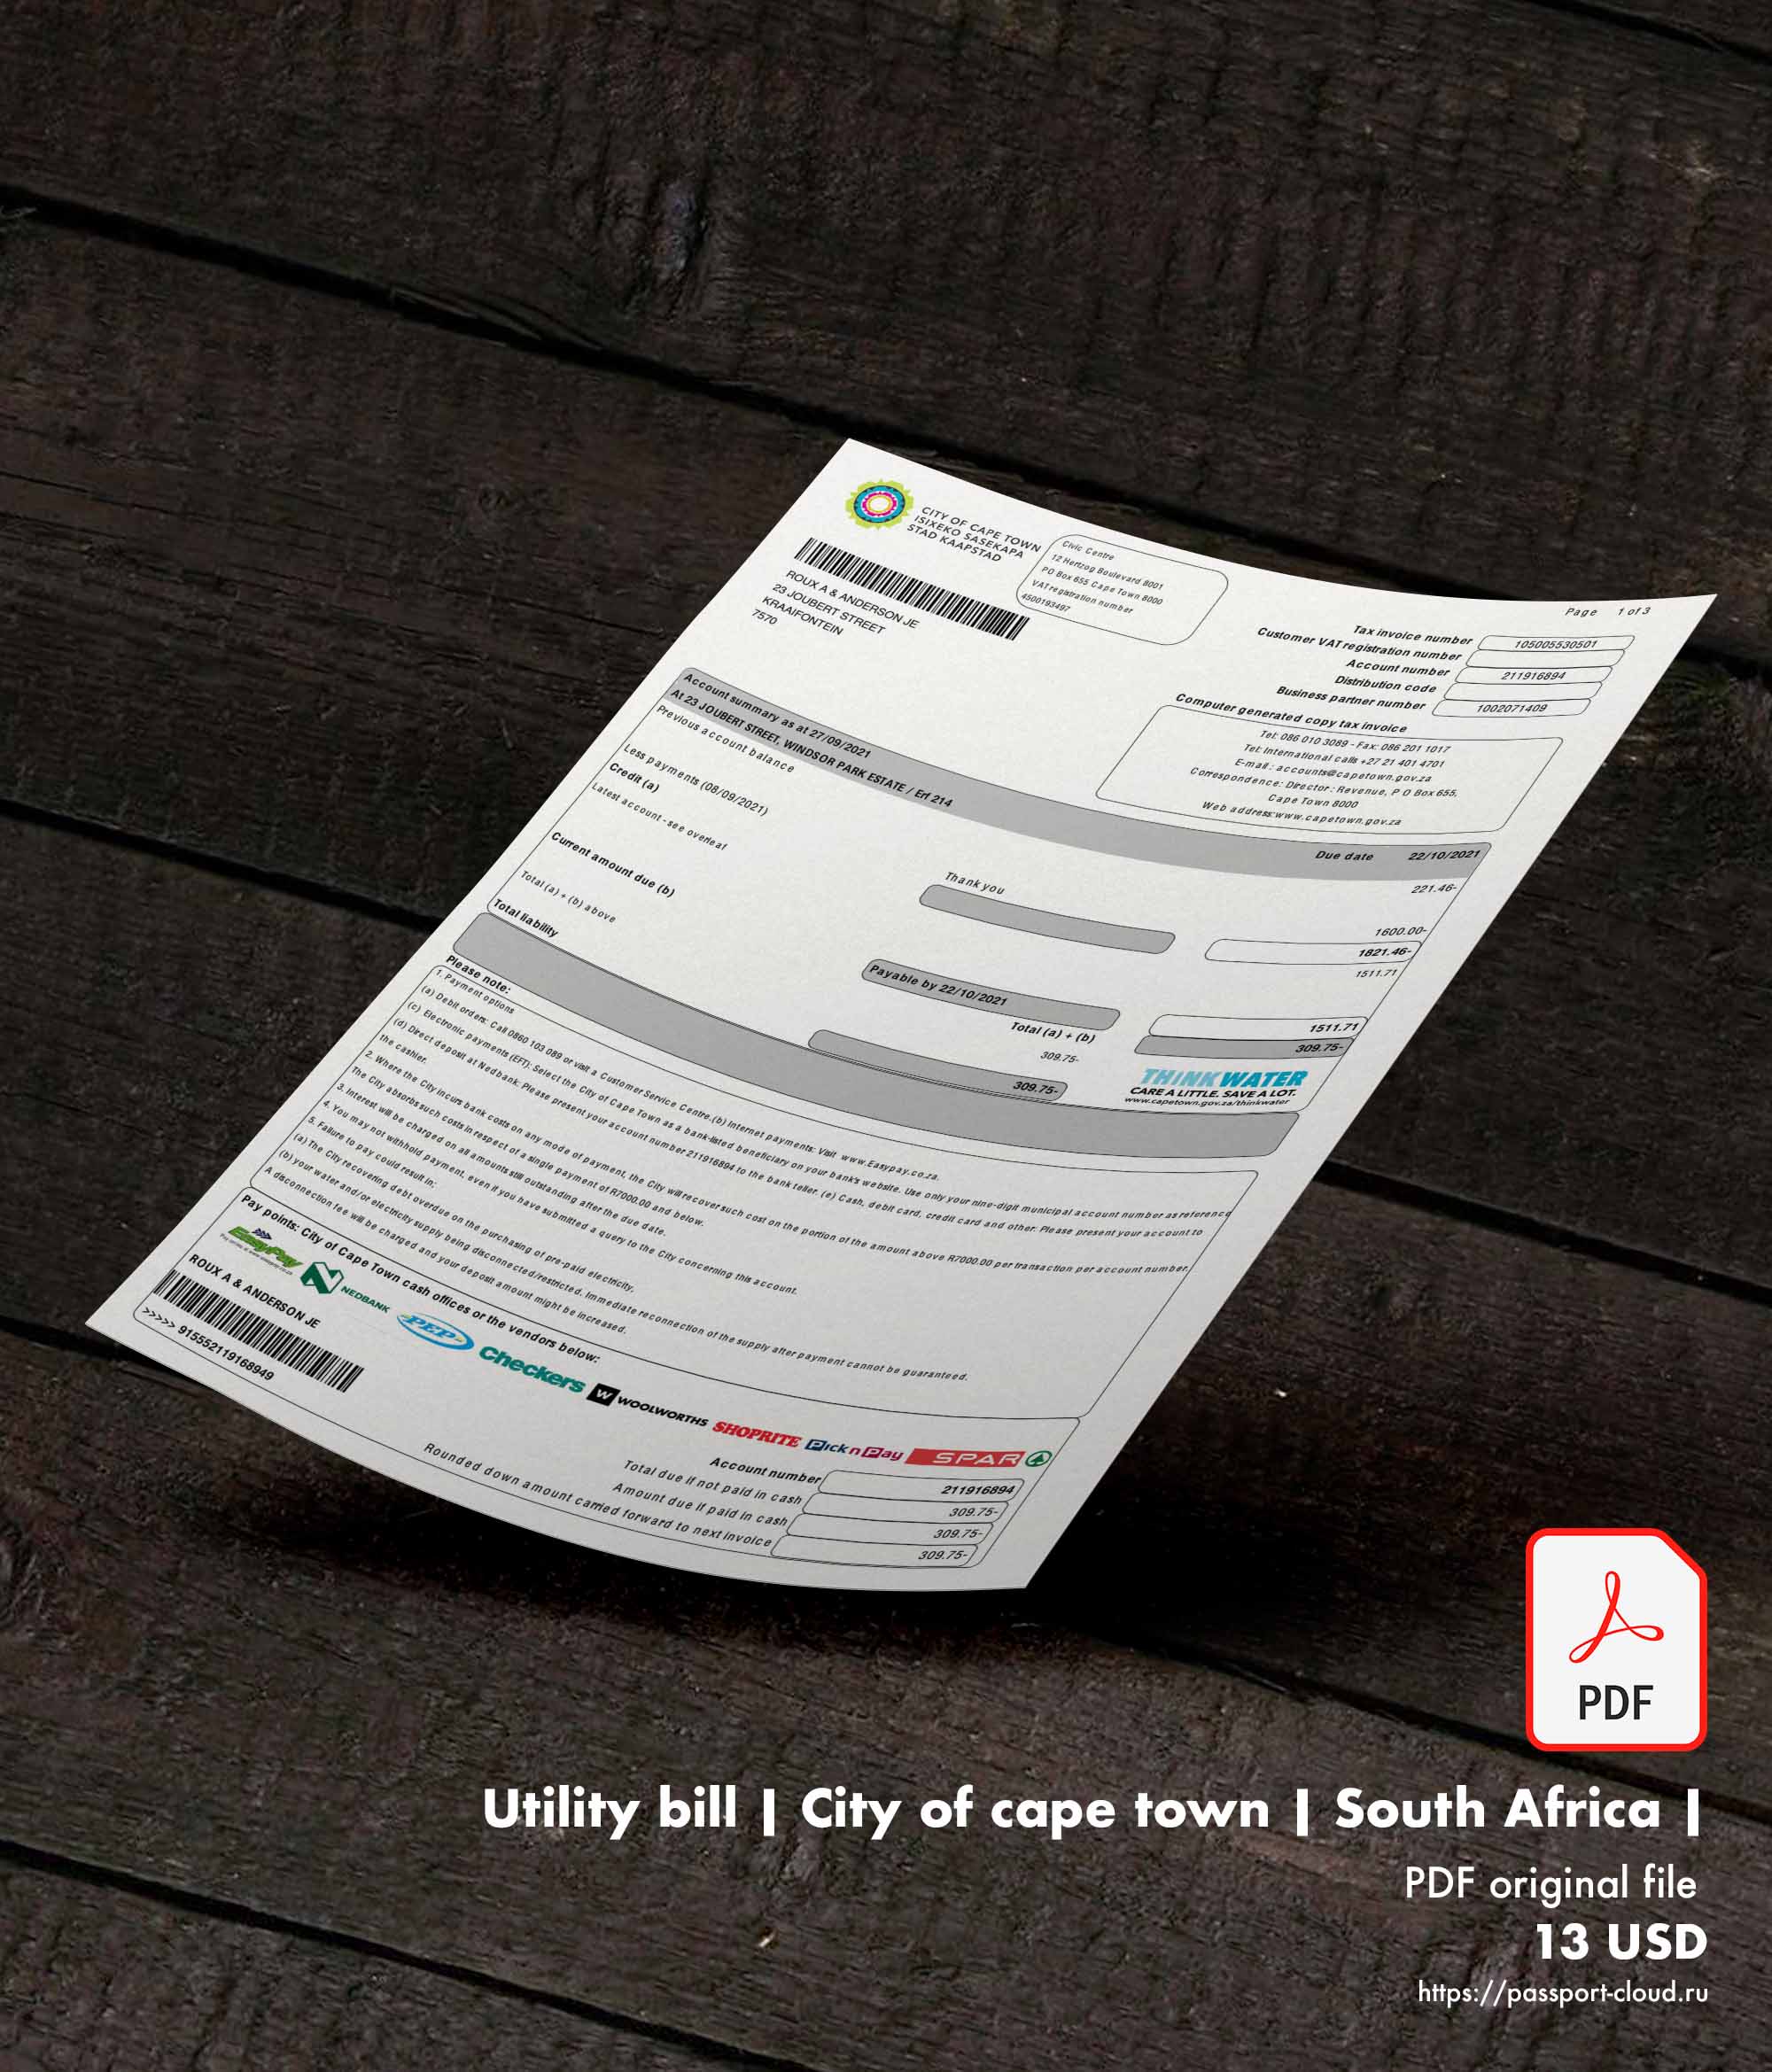 Utility bill | City of cape town | South Africa |1